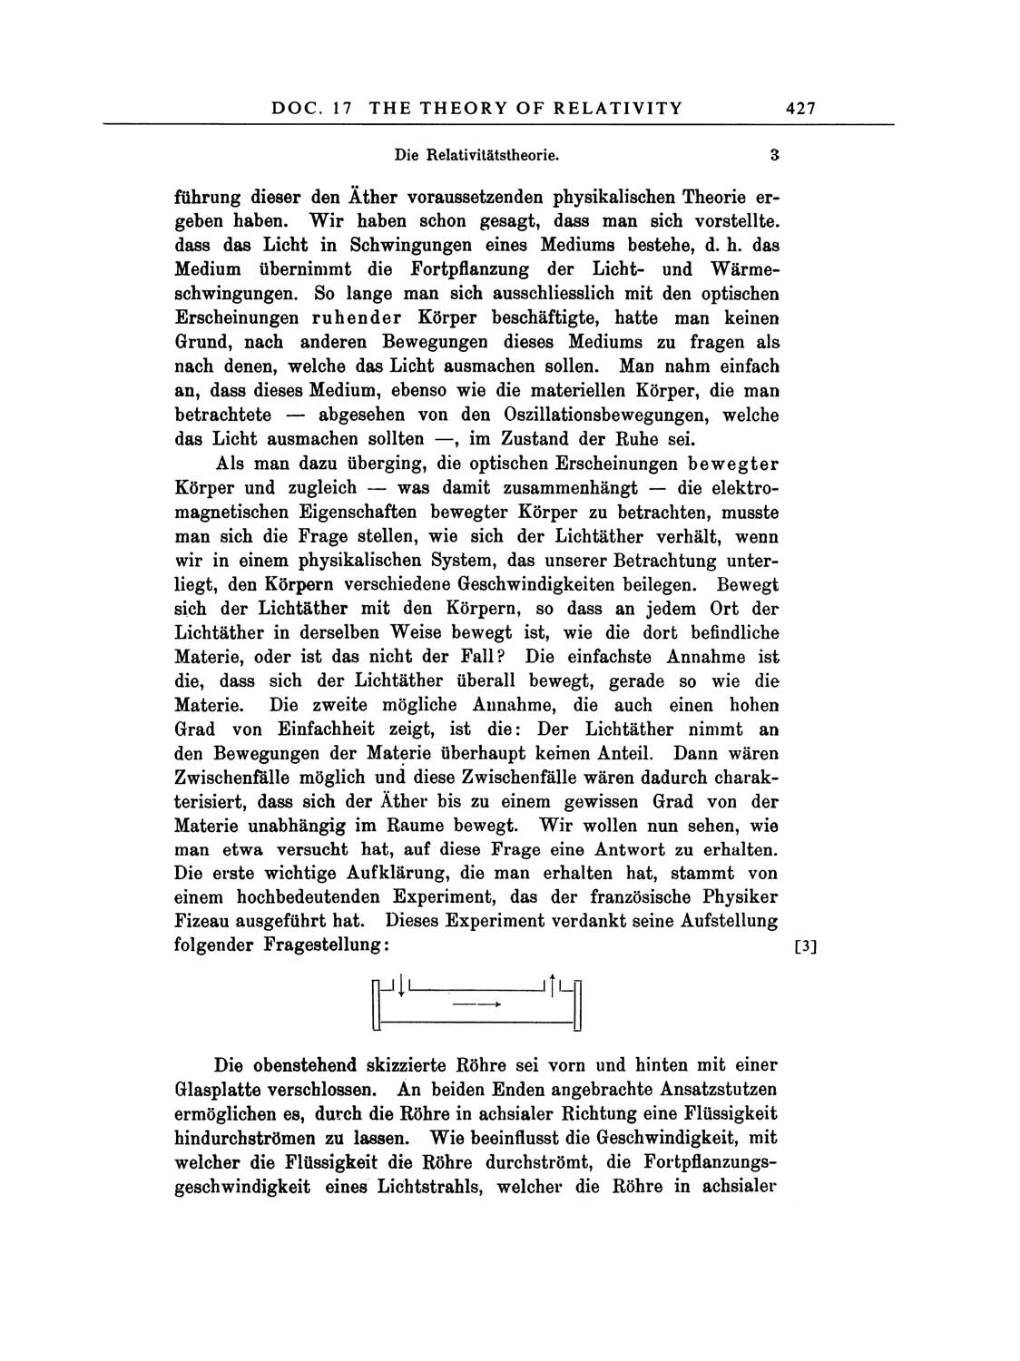 Volume 3: The Swiss Years: Writings 1909-1911 page 427